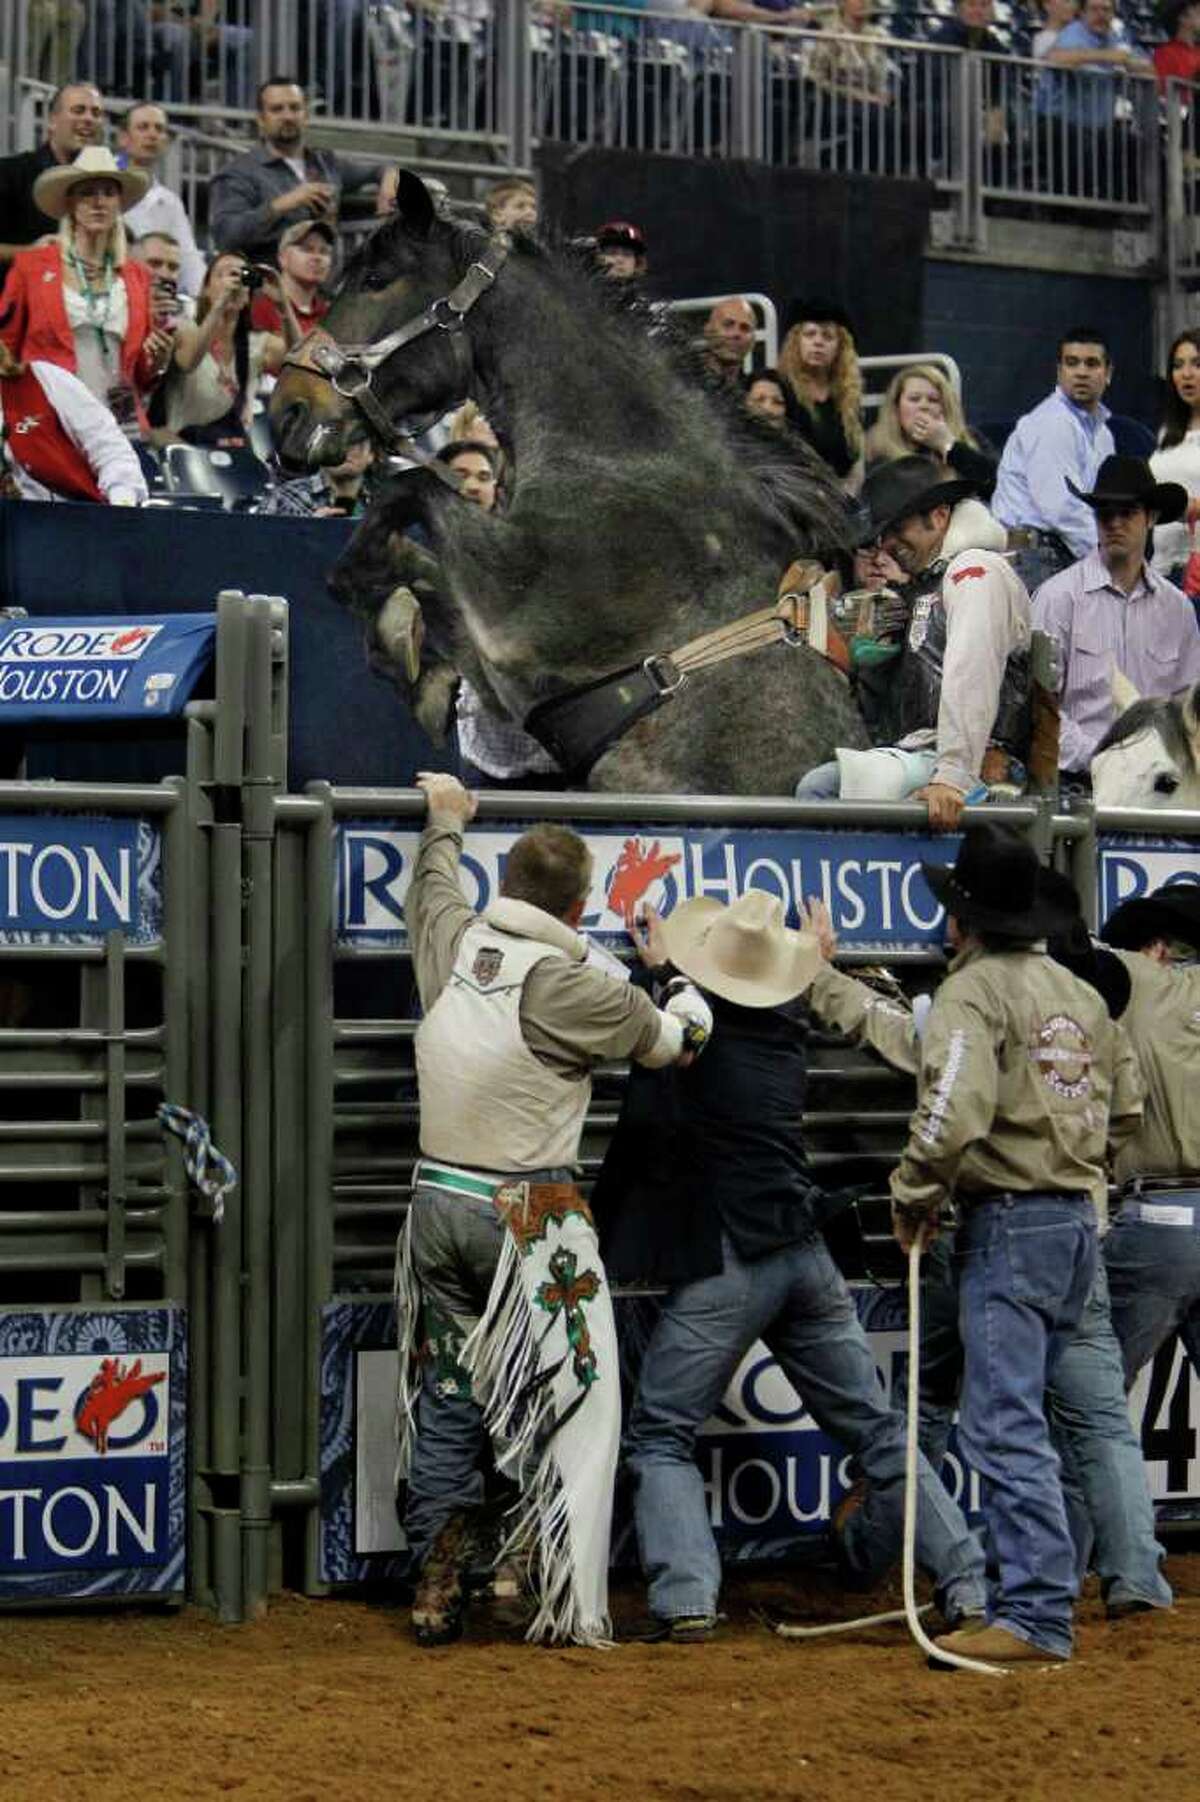 Steven Anding hangs on as his horse is up on it's hind leg right before competing in Bareback Riding during the Rodeo Houston BP Super Series I Round 2 at Reliant Stadium on Wednesday, Feb. 29, 2012, in Houston. ( Mayra Beltran / Houston Chronicle )